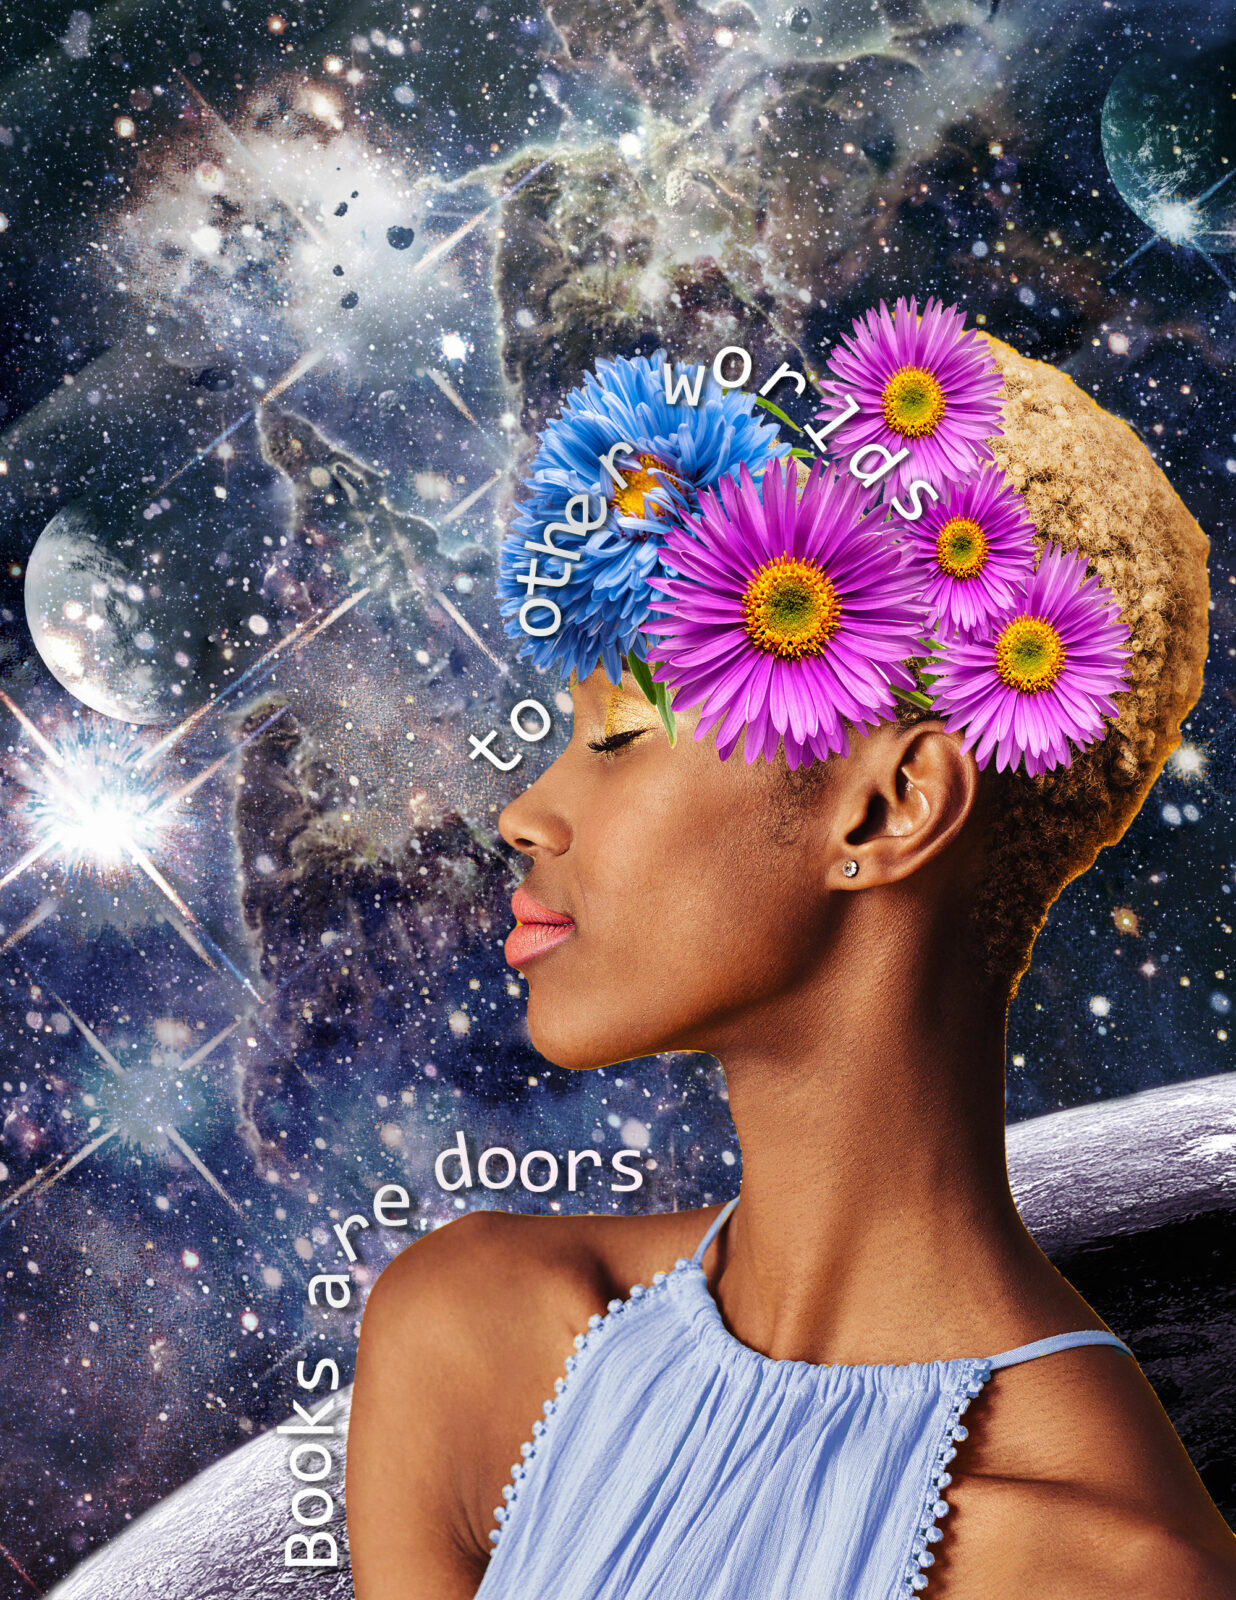 A woman smiles, with flowers emerging from her head, the cosmos and planets expanding behind her. Books are doors to other worlds stretches in text around her and she looks lost in her imagination.